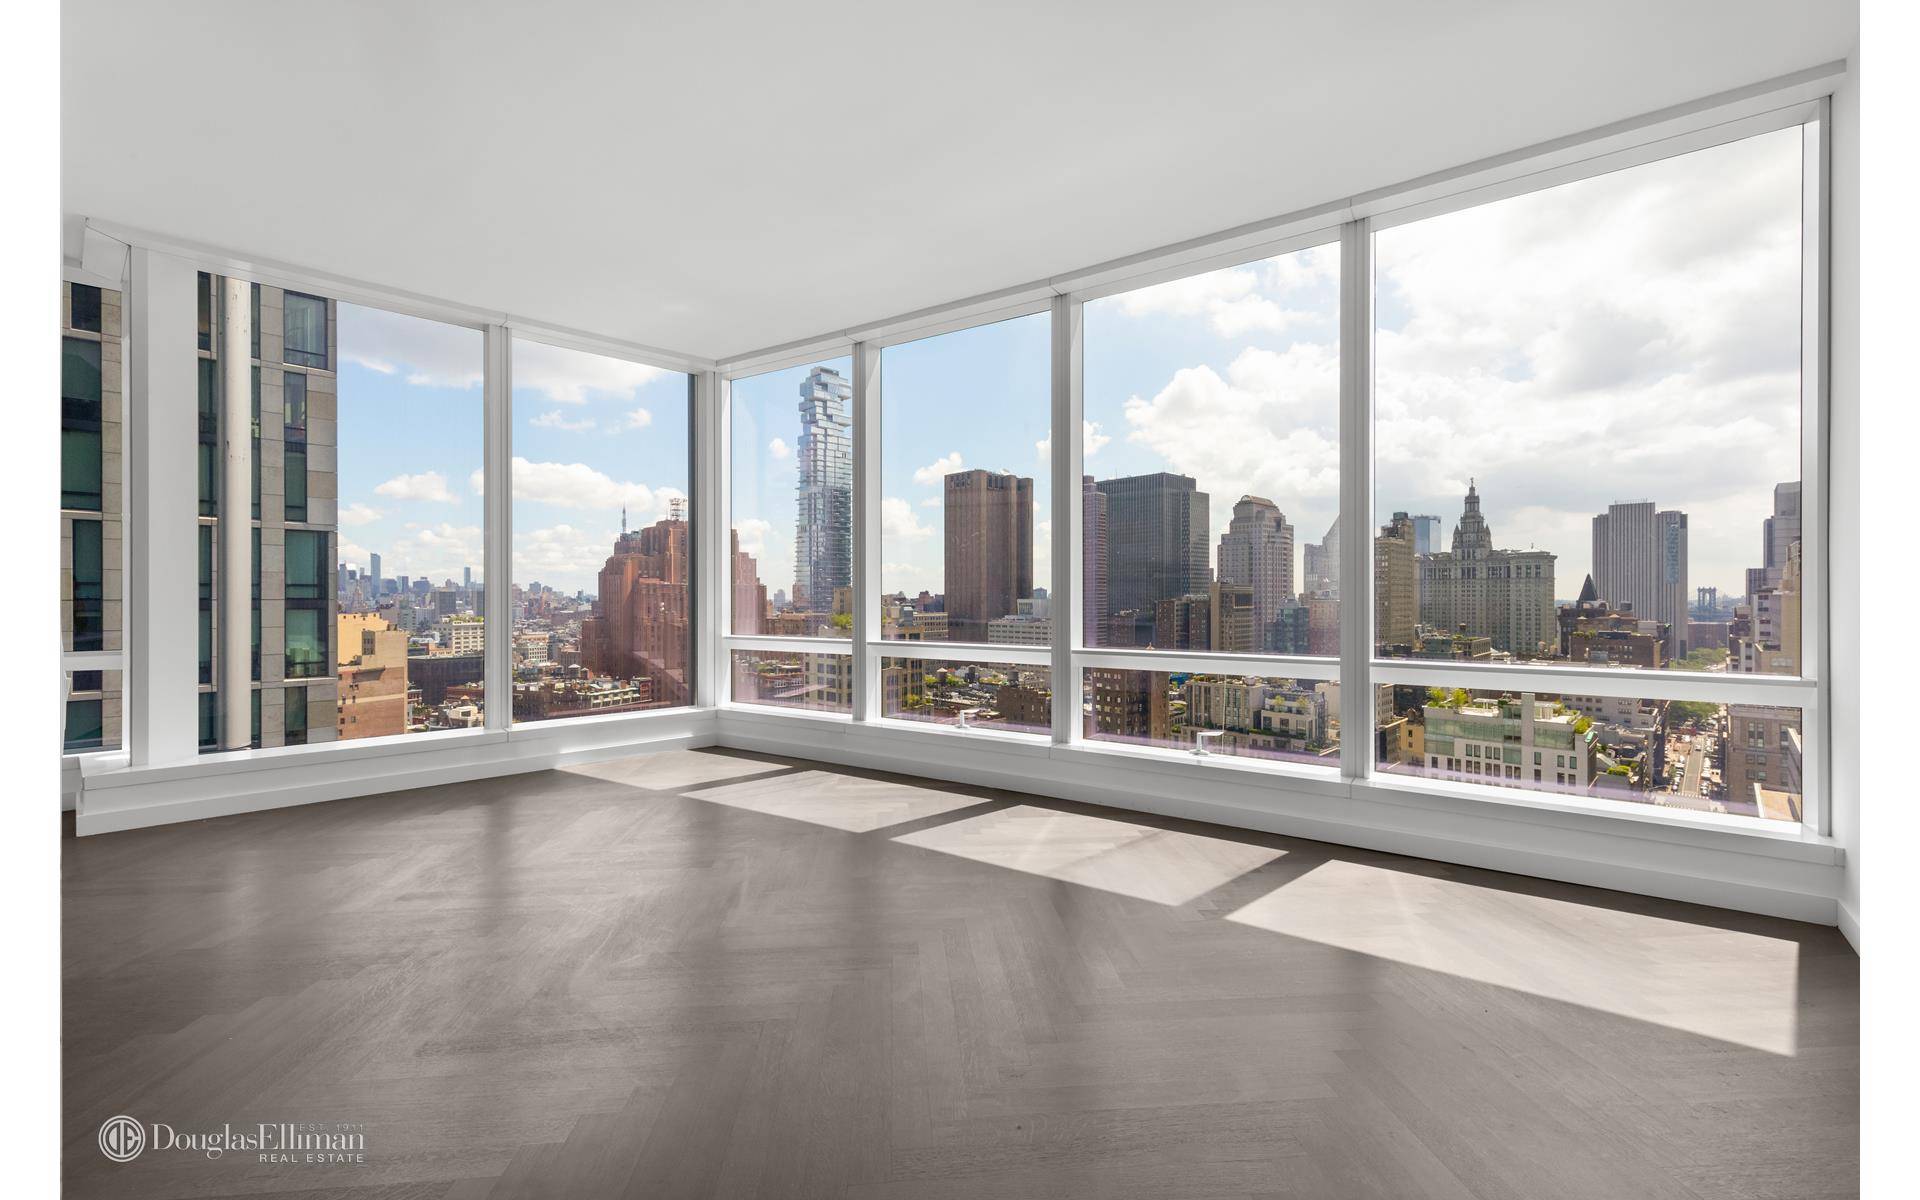 Exceptional living awaits in prime Tribeca, in a superlative 3 bedroom 3.